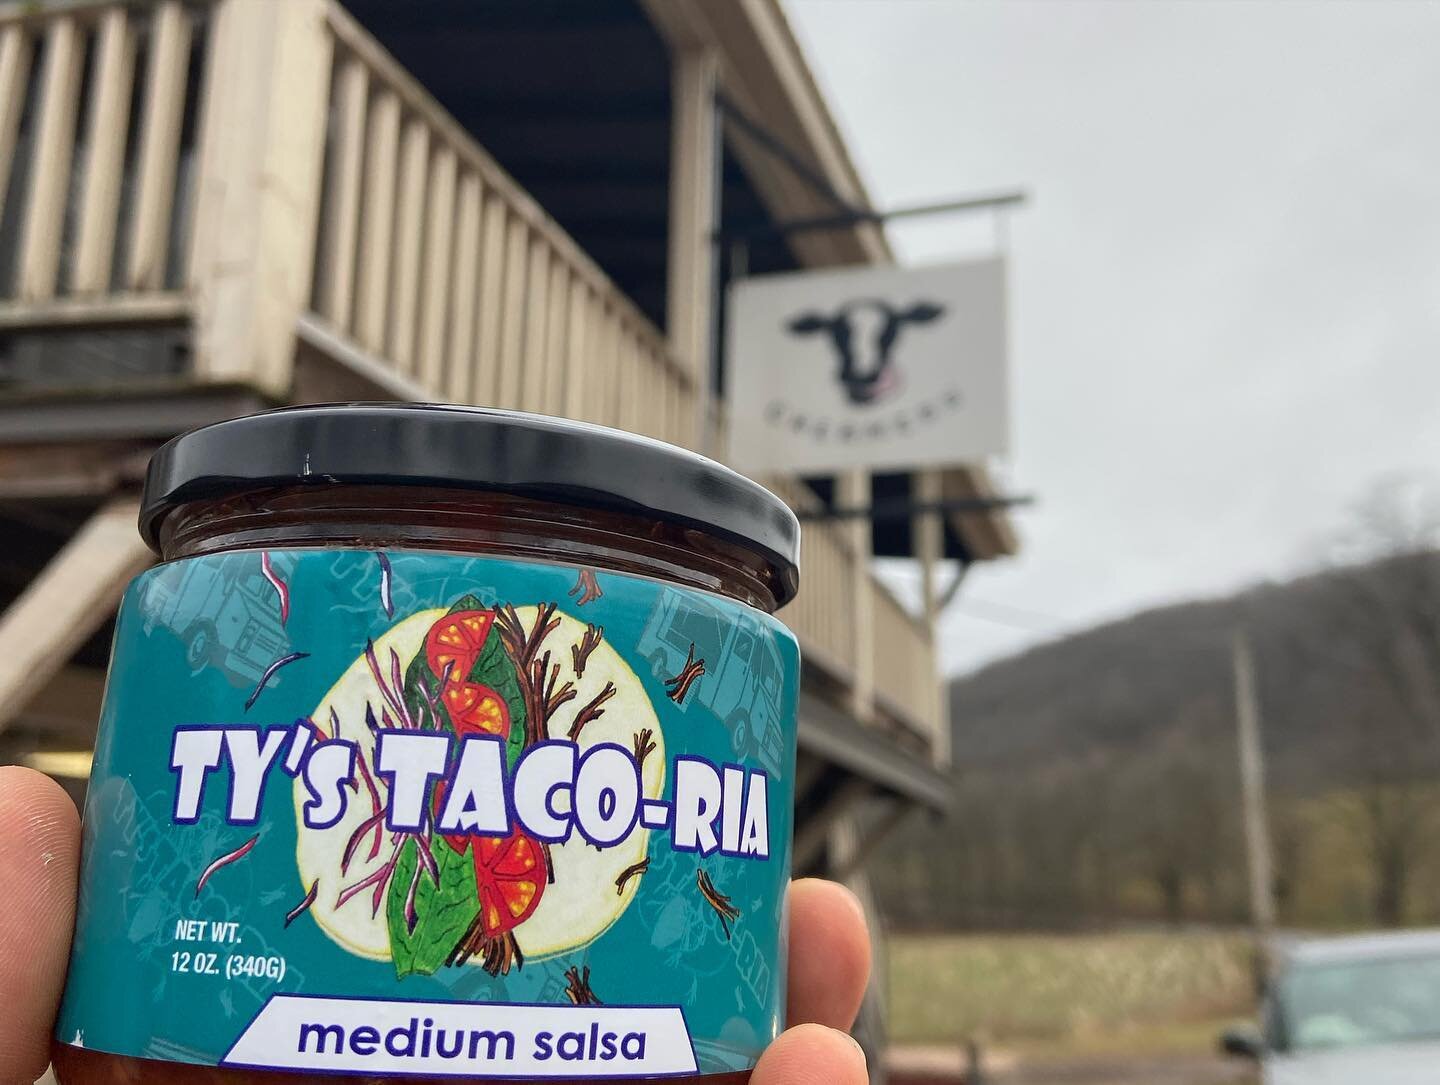 Made the rounds today 💃🏼 

You can find our salsa at:
@tystacoria 
@stricklandhollowfarm 
@clarkdairyfarms 
@watershedroxbury 
@humdinger.farm.store 
@homegoodsofmargaretville 
@uniongrovedistillery 
@awestruckmill 

🌟 Fun fact! If you bring your 